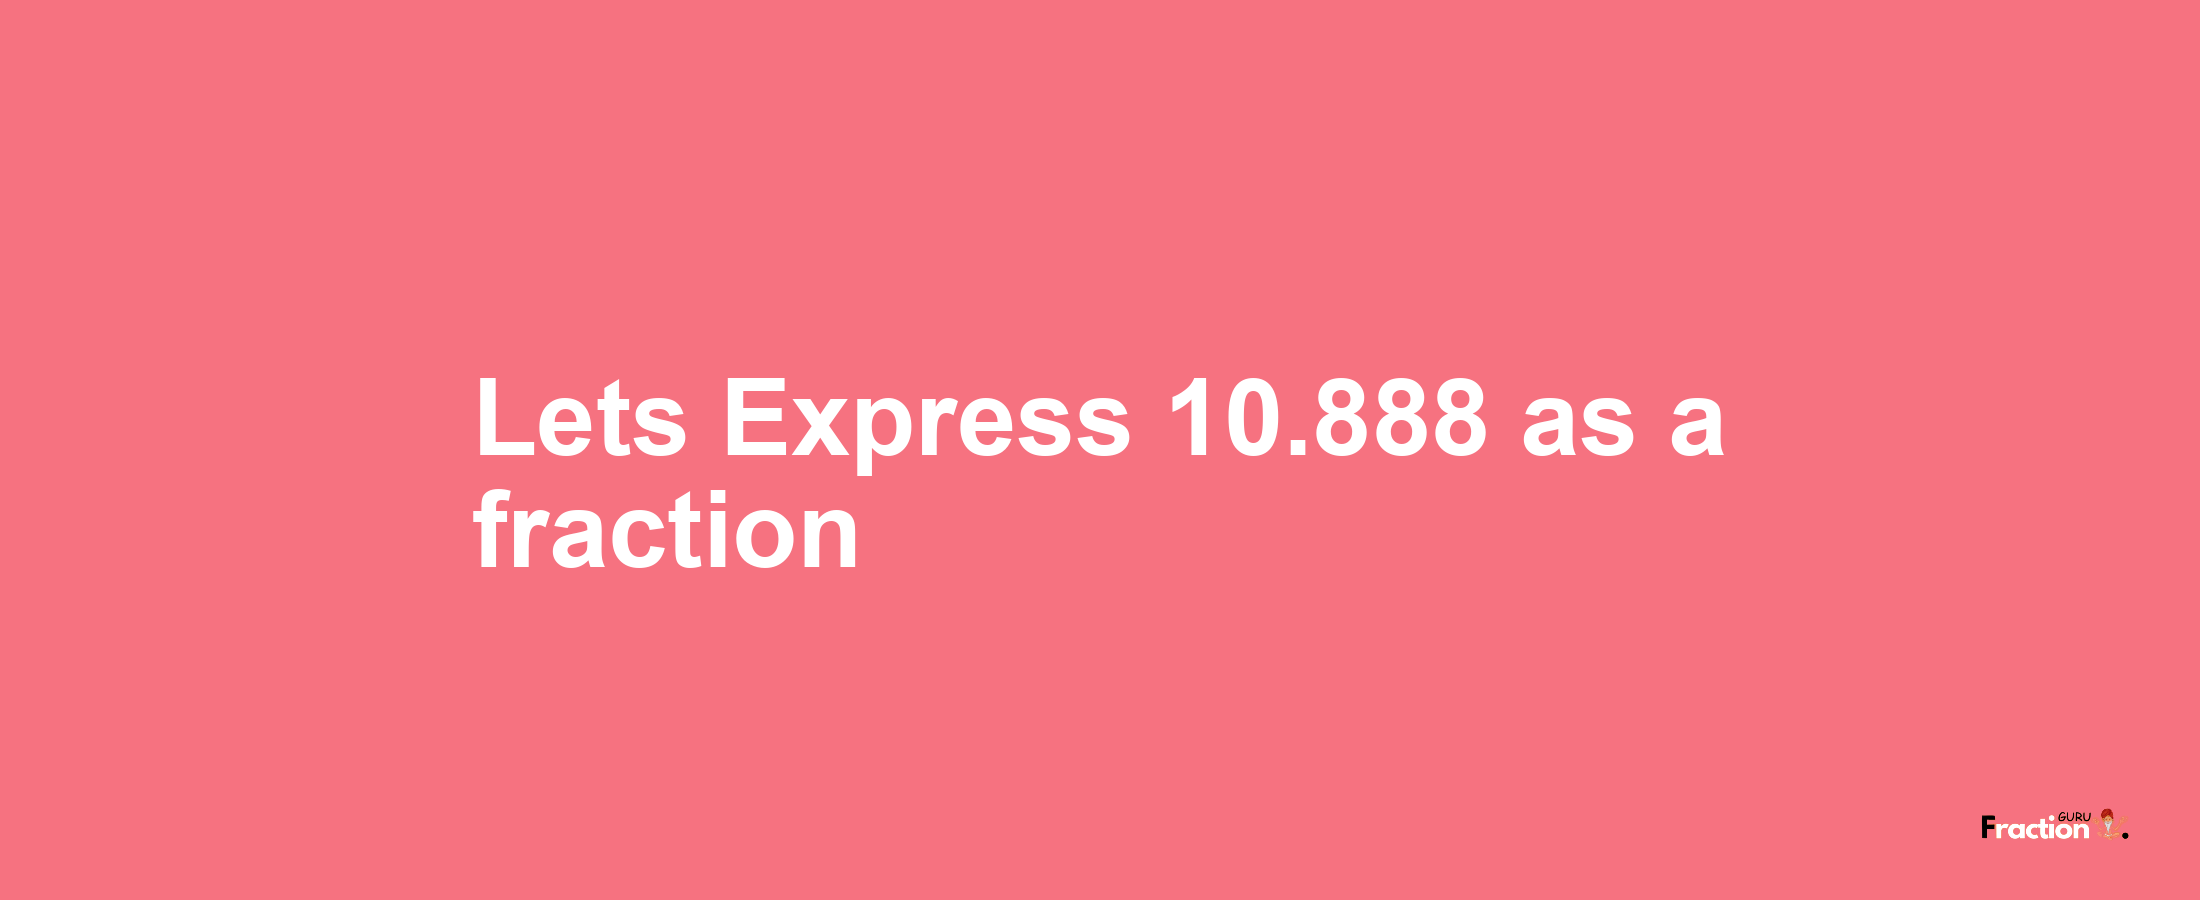 Lets Express 10.888 as afraction